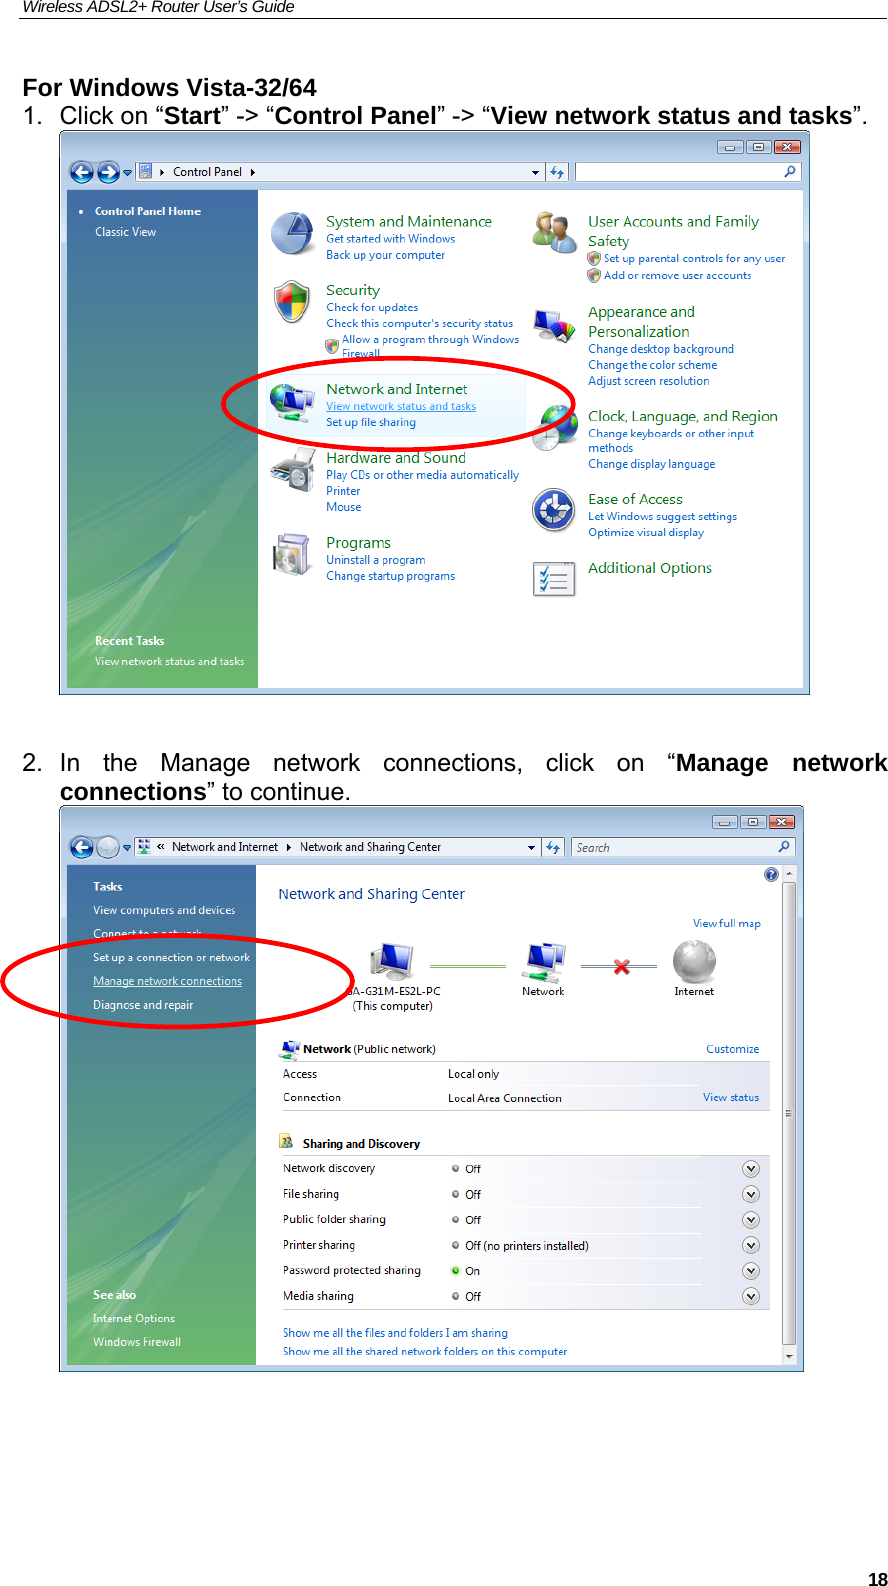 Wireless ADSL2+ Router User’s Guide     18For Windows Vista-32/64 1.  Click on “Start” -&gt; “Control Panel” -&gt; “View network status and tasks”.   2. In the Manage network connections, click on “Manage network connections” to continue.     